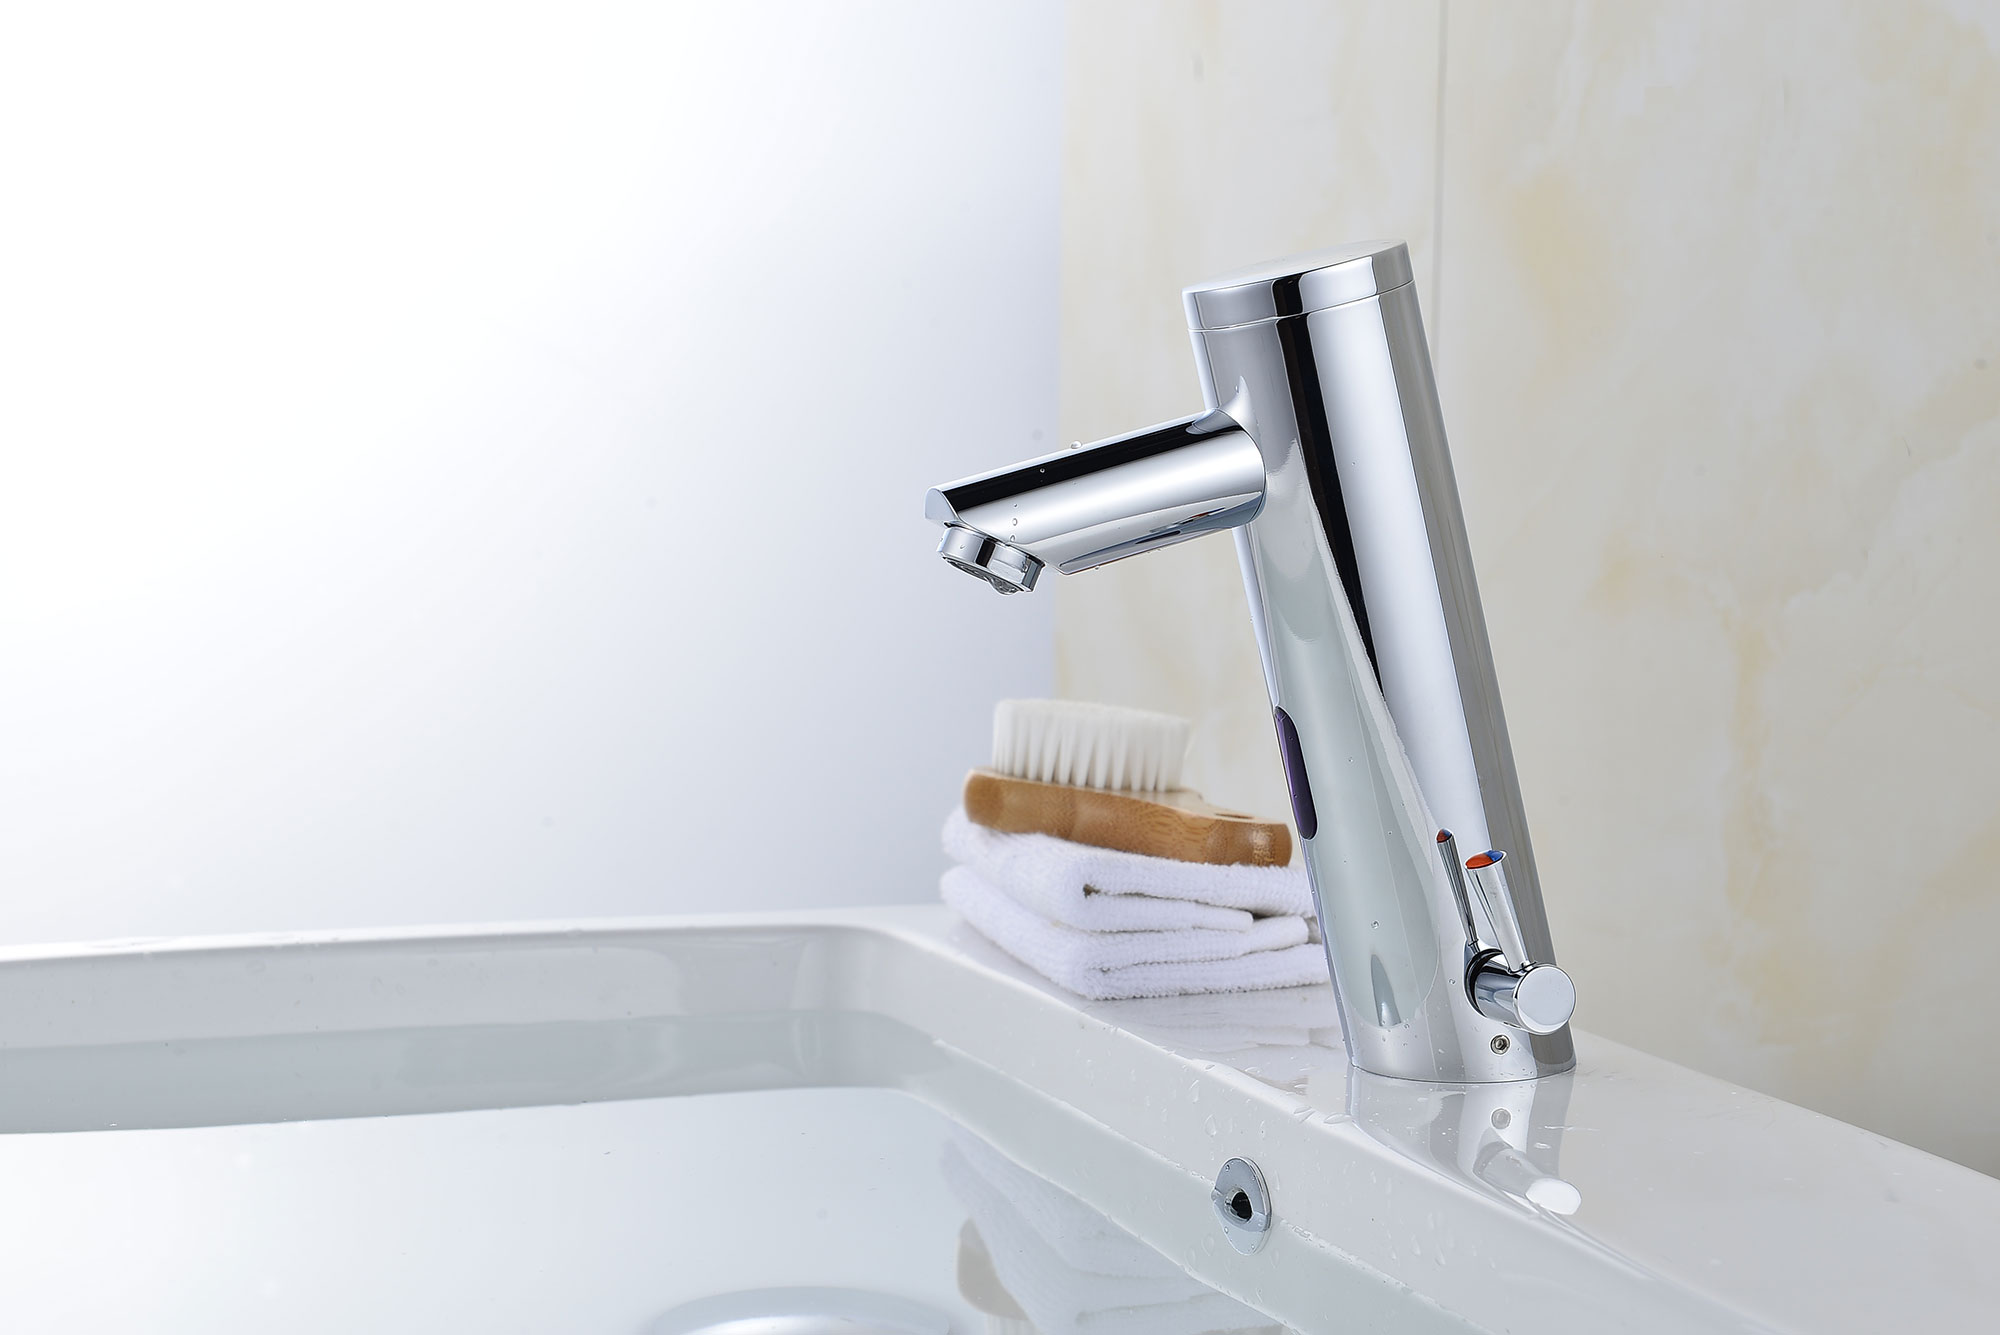 Automatic Sensor Bathroom Sink Faucet with Hot & Cold Water Temperature Control